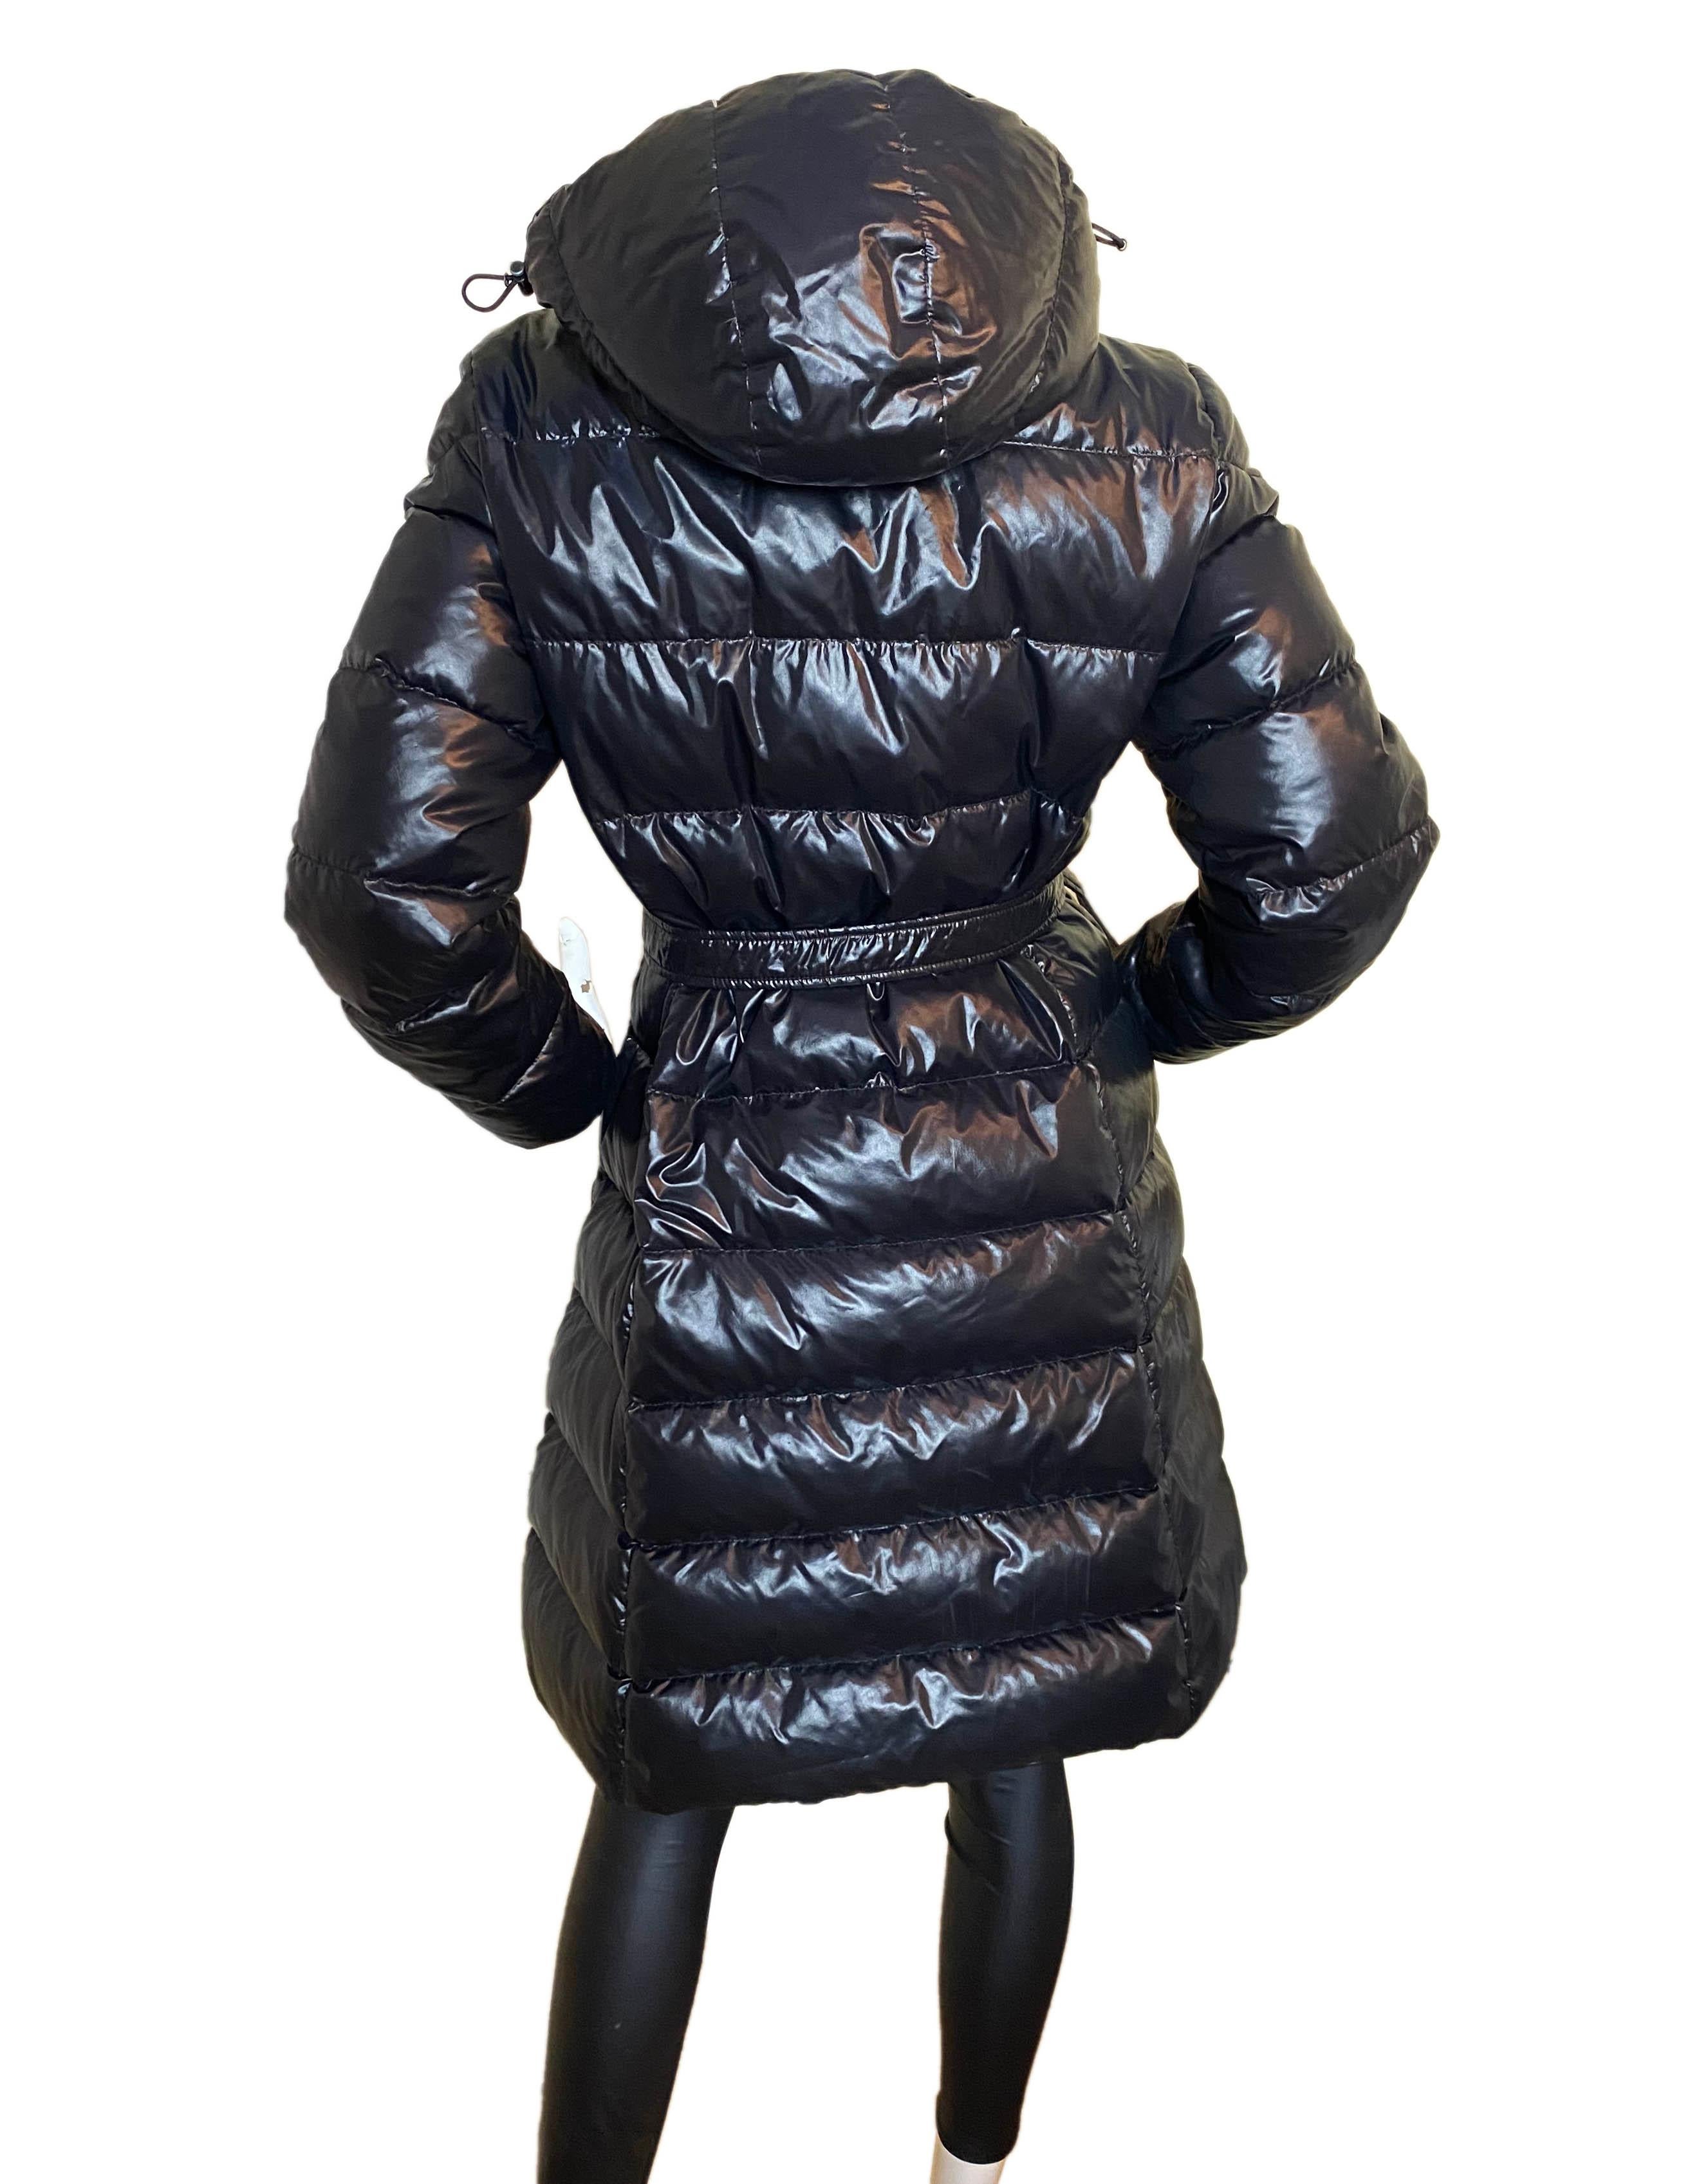 Moncler Meina Puffer Down Coat w/Belt & Detachable Hood

Made In: Hungary
Color: Black
Materials: Nylon
Lining: Nylon
Opening/Closure: Snap
Overall Condition: Very Good - peeling to snaps, missing cartoon inside
Includes: Hood, belt

Tag Size: